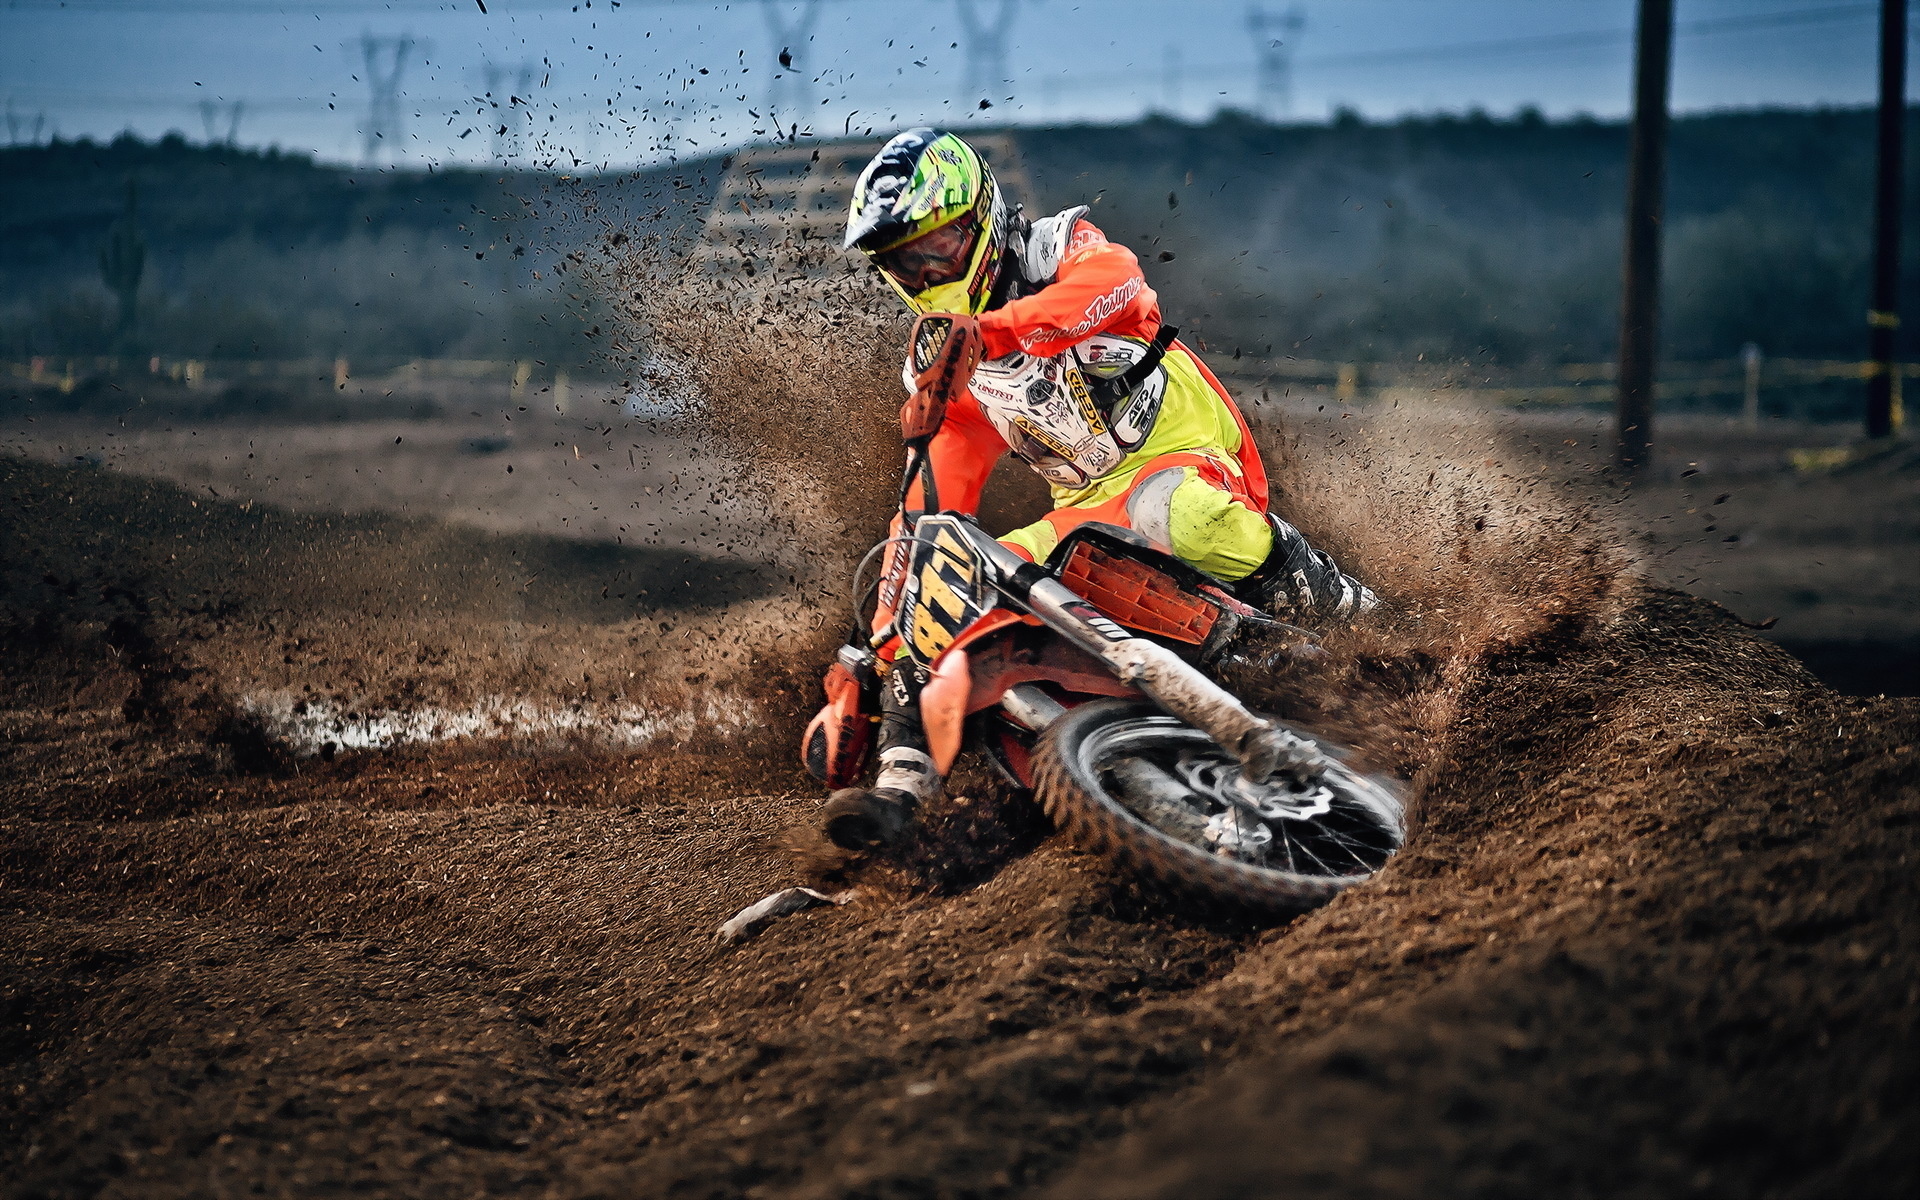 Motocross: Almost Went Off The Track While Cornering, Bike Stunt. 1920x1200 HD Wallpaper.